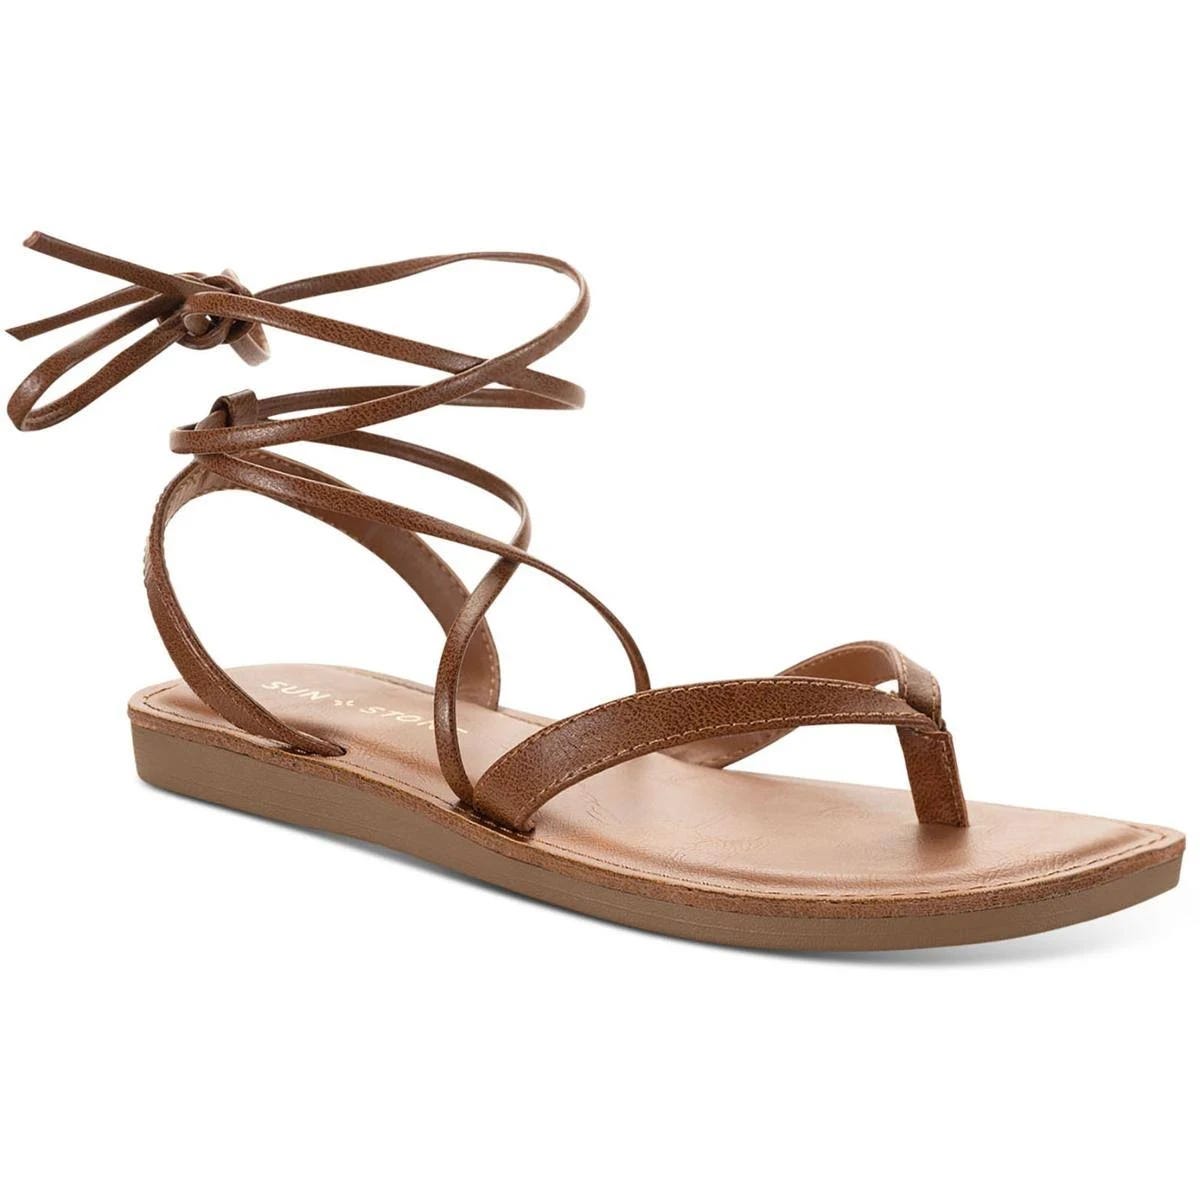 Stylish Strappy Brown Sandals for Women | Image